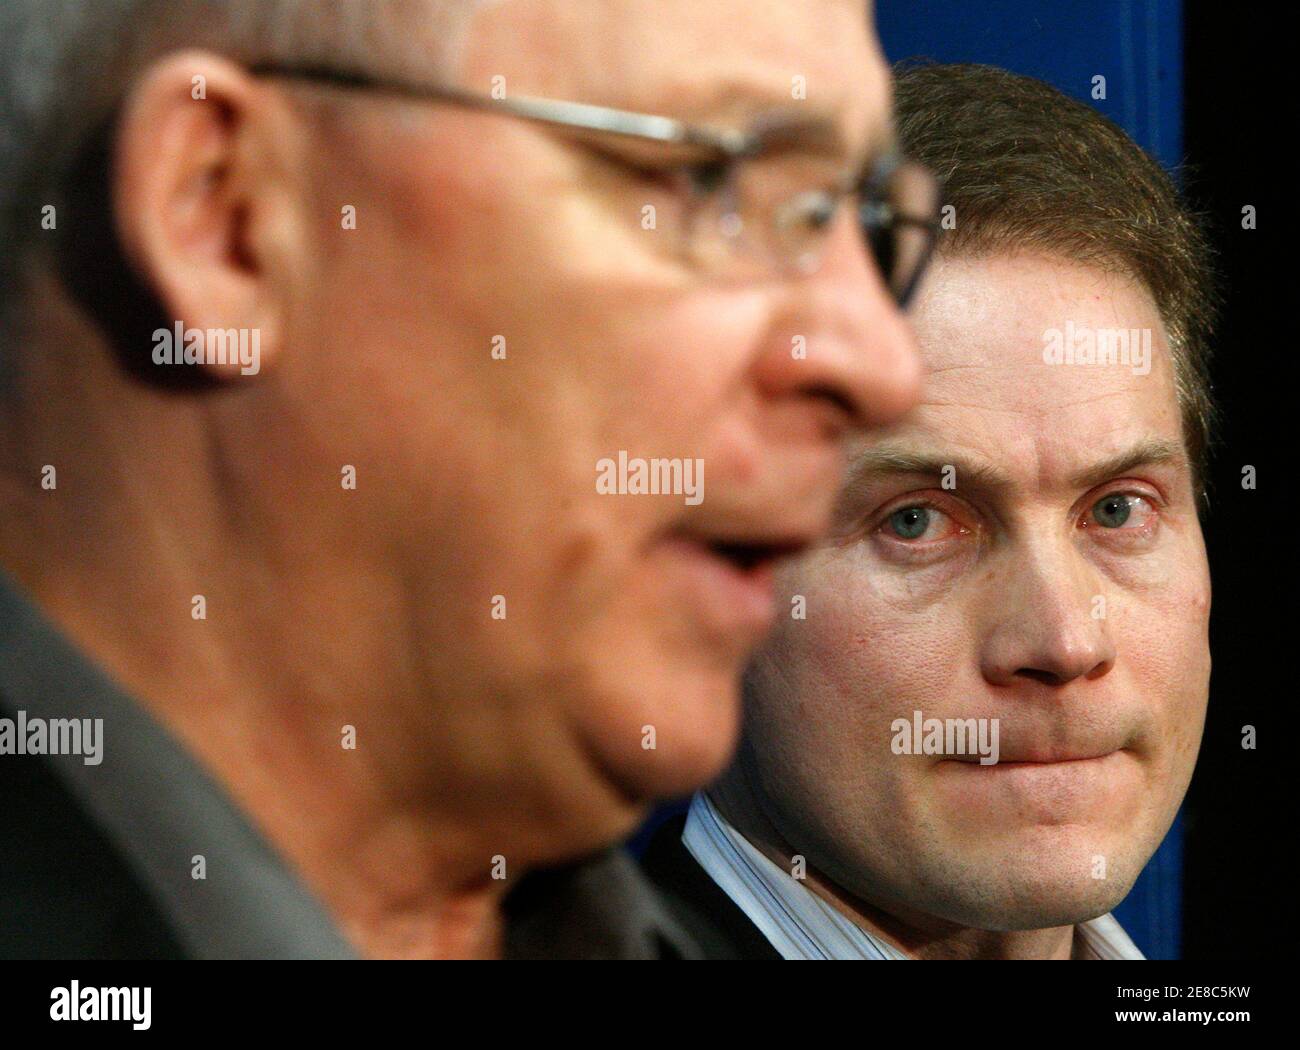 NHL ice hockey team Ottawa Senators' new head coach Cory Clouston (R) listens to general manager Bryan Murray during a news conference in Ottawa February 2, 2009. Clouston replaced Craig Hartsburg, who was fired after less than eight months in the job.       REUTERS/Chris Wattie       (CANADA) Stock Photo